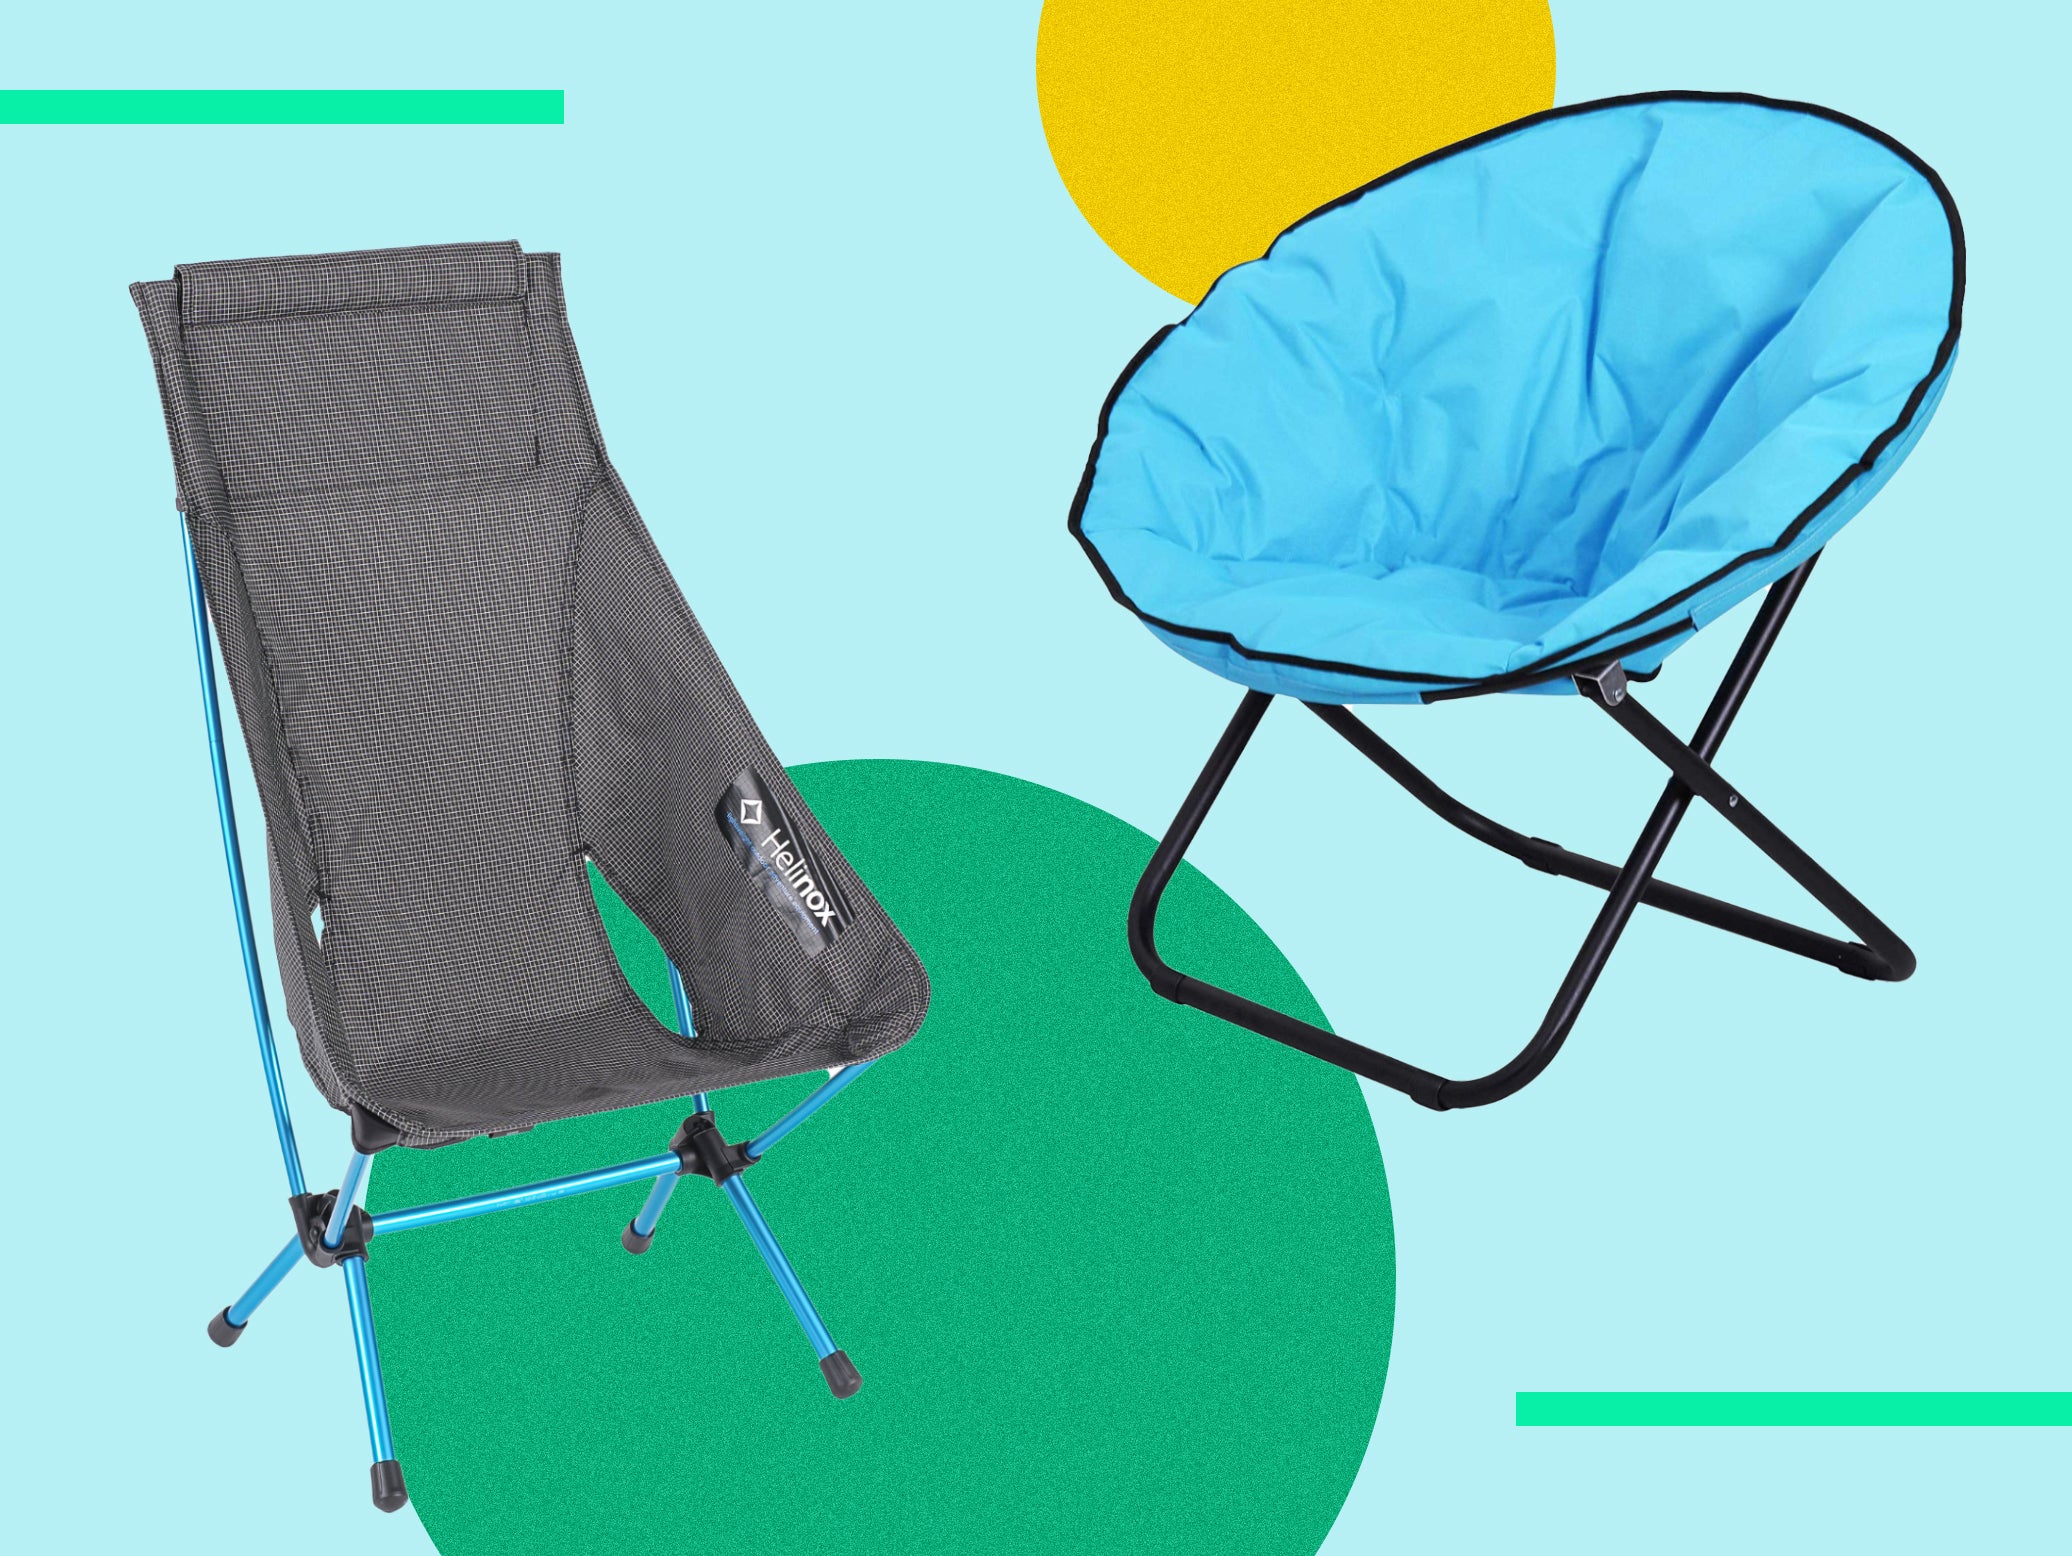 Portable Outdoor Folding Chair Light Fishing Dew Camping Barbecue Lined up Train Bench Sketch Folding Chair-Green 